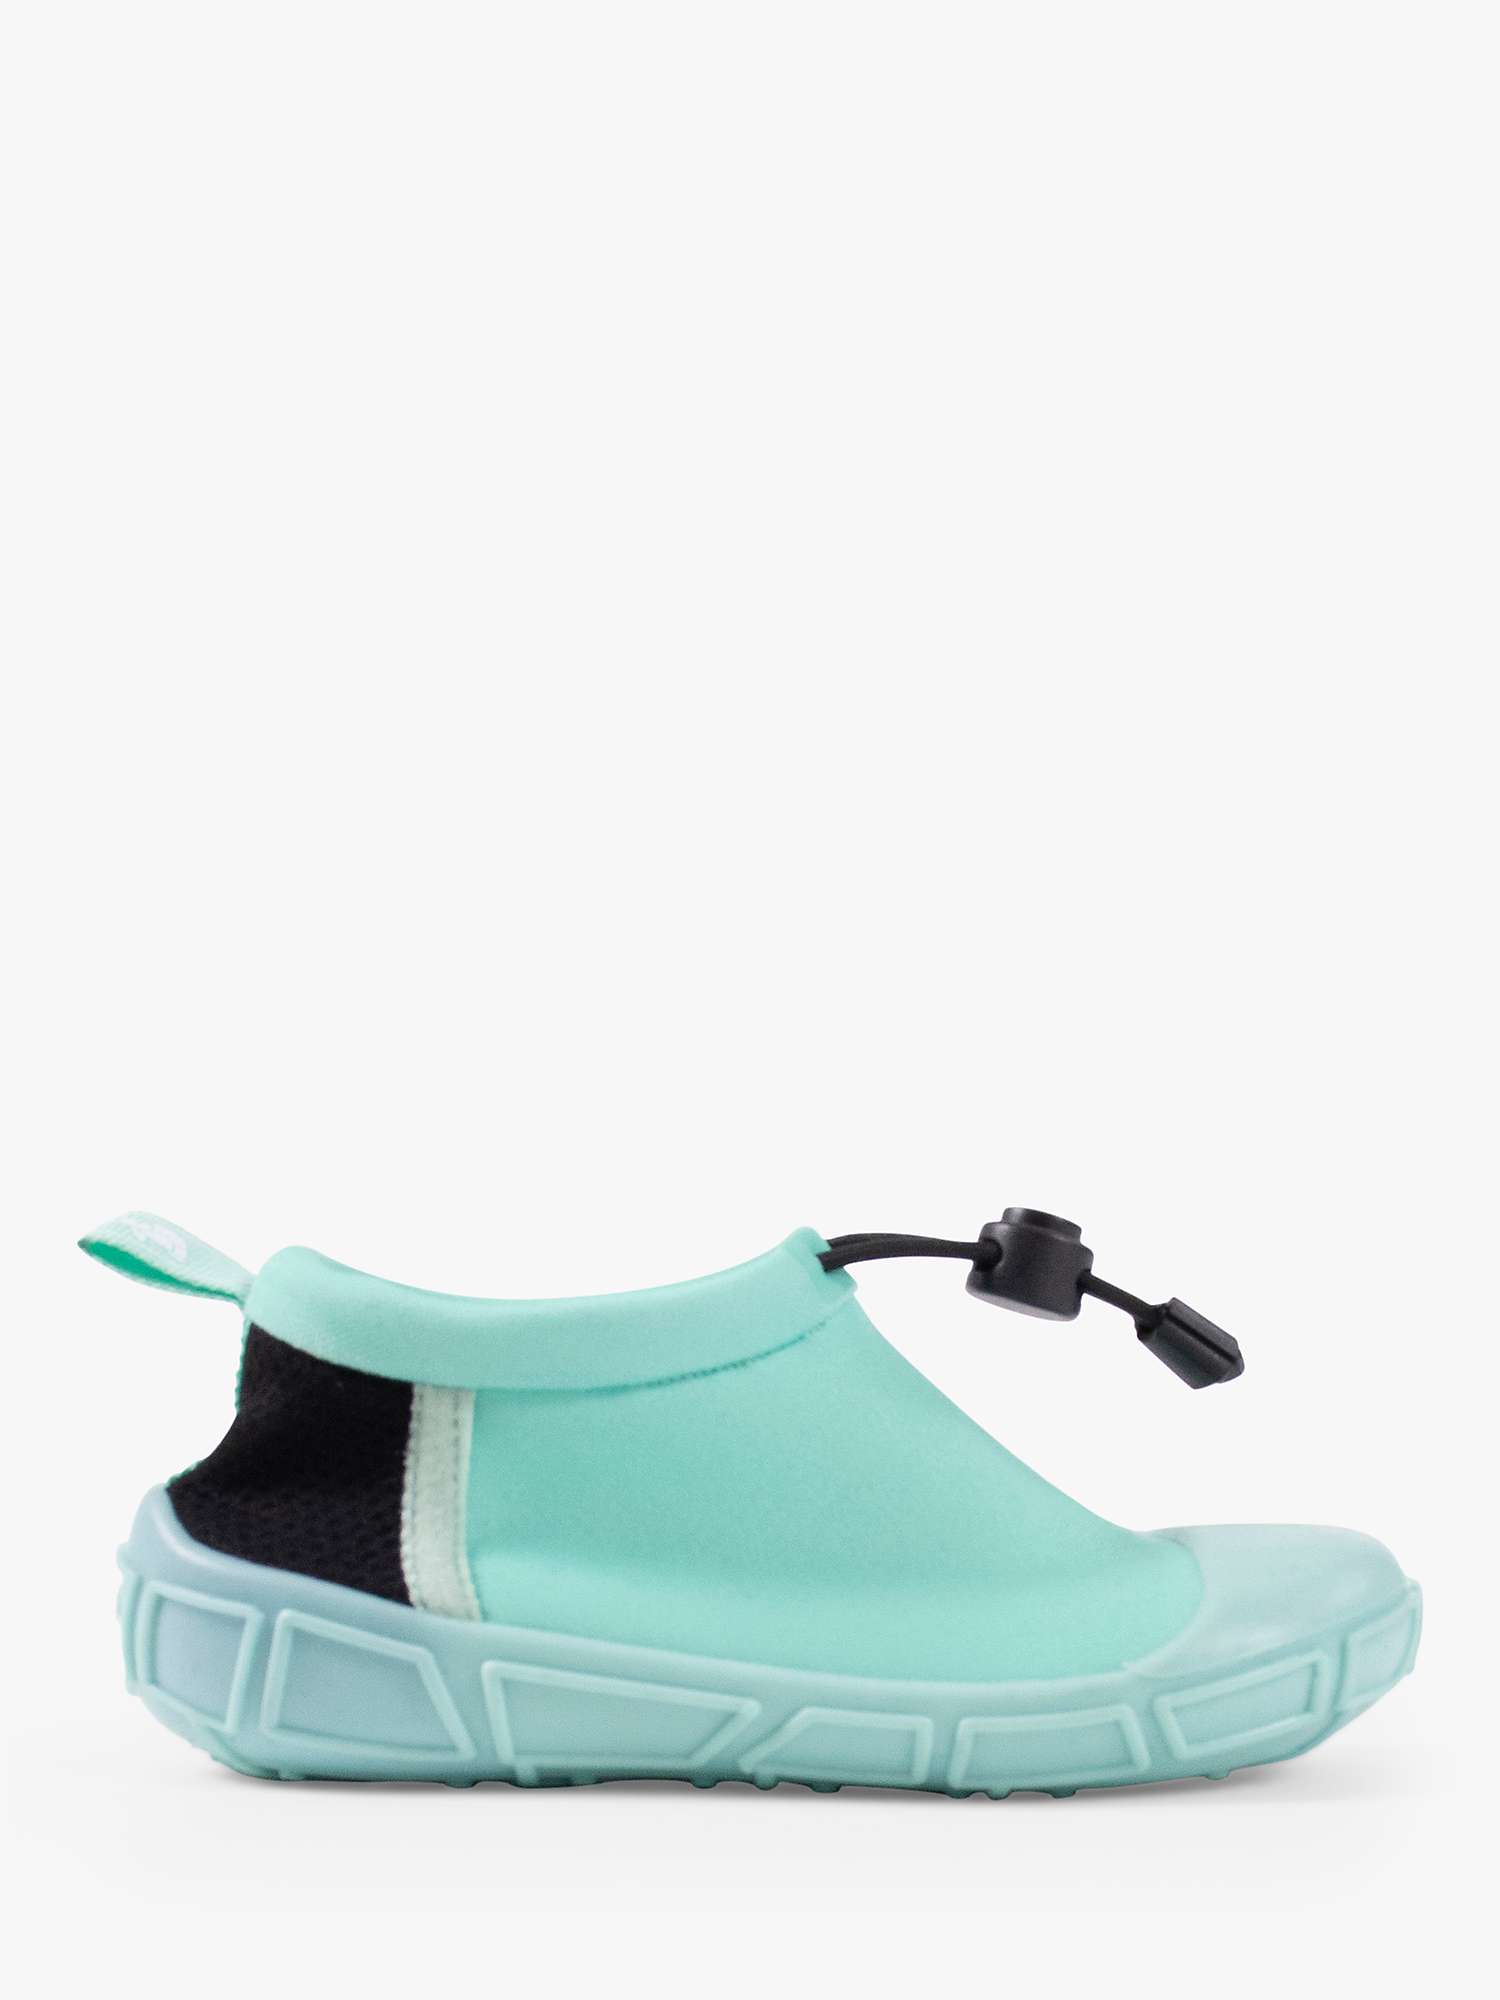 Buy Turtl Kids' Recycled Toggle Aqua Shoes Online at johnlewis.com